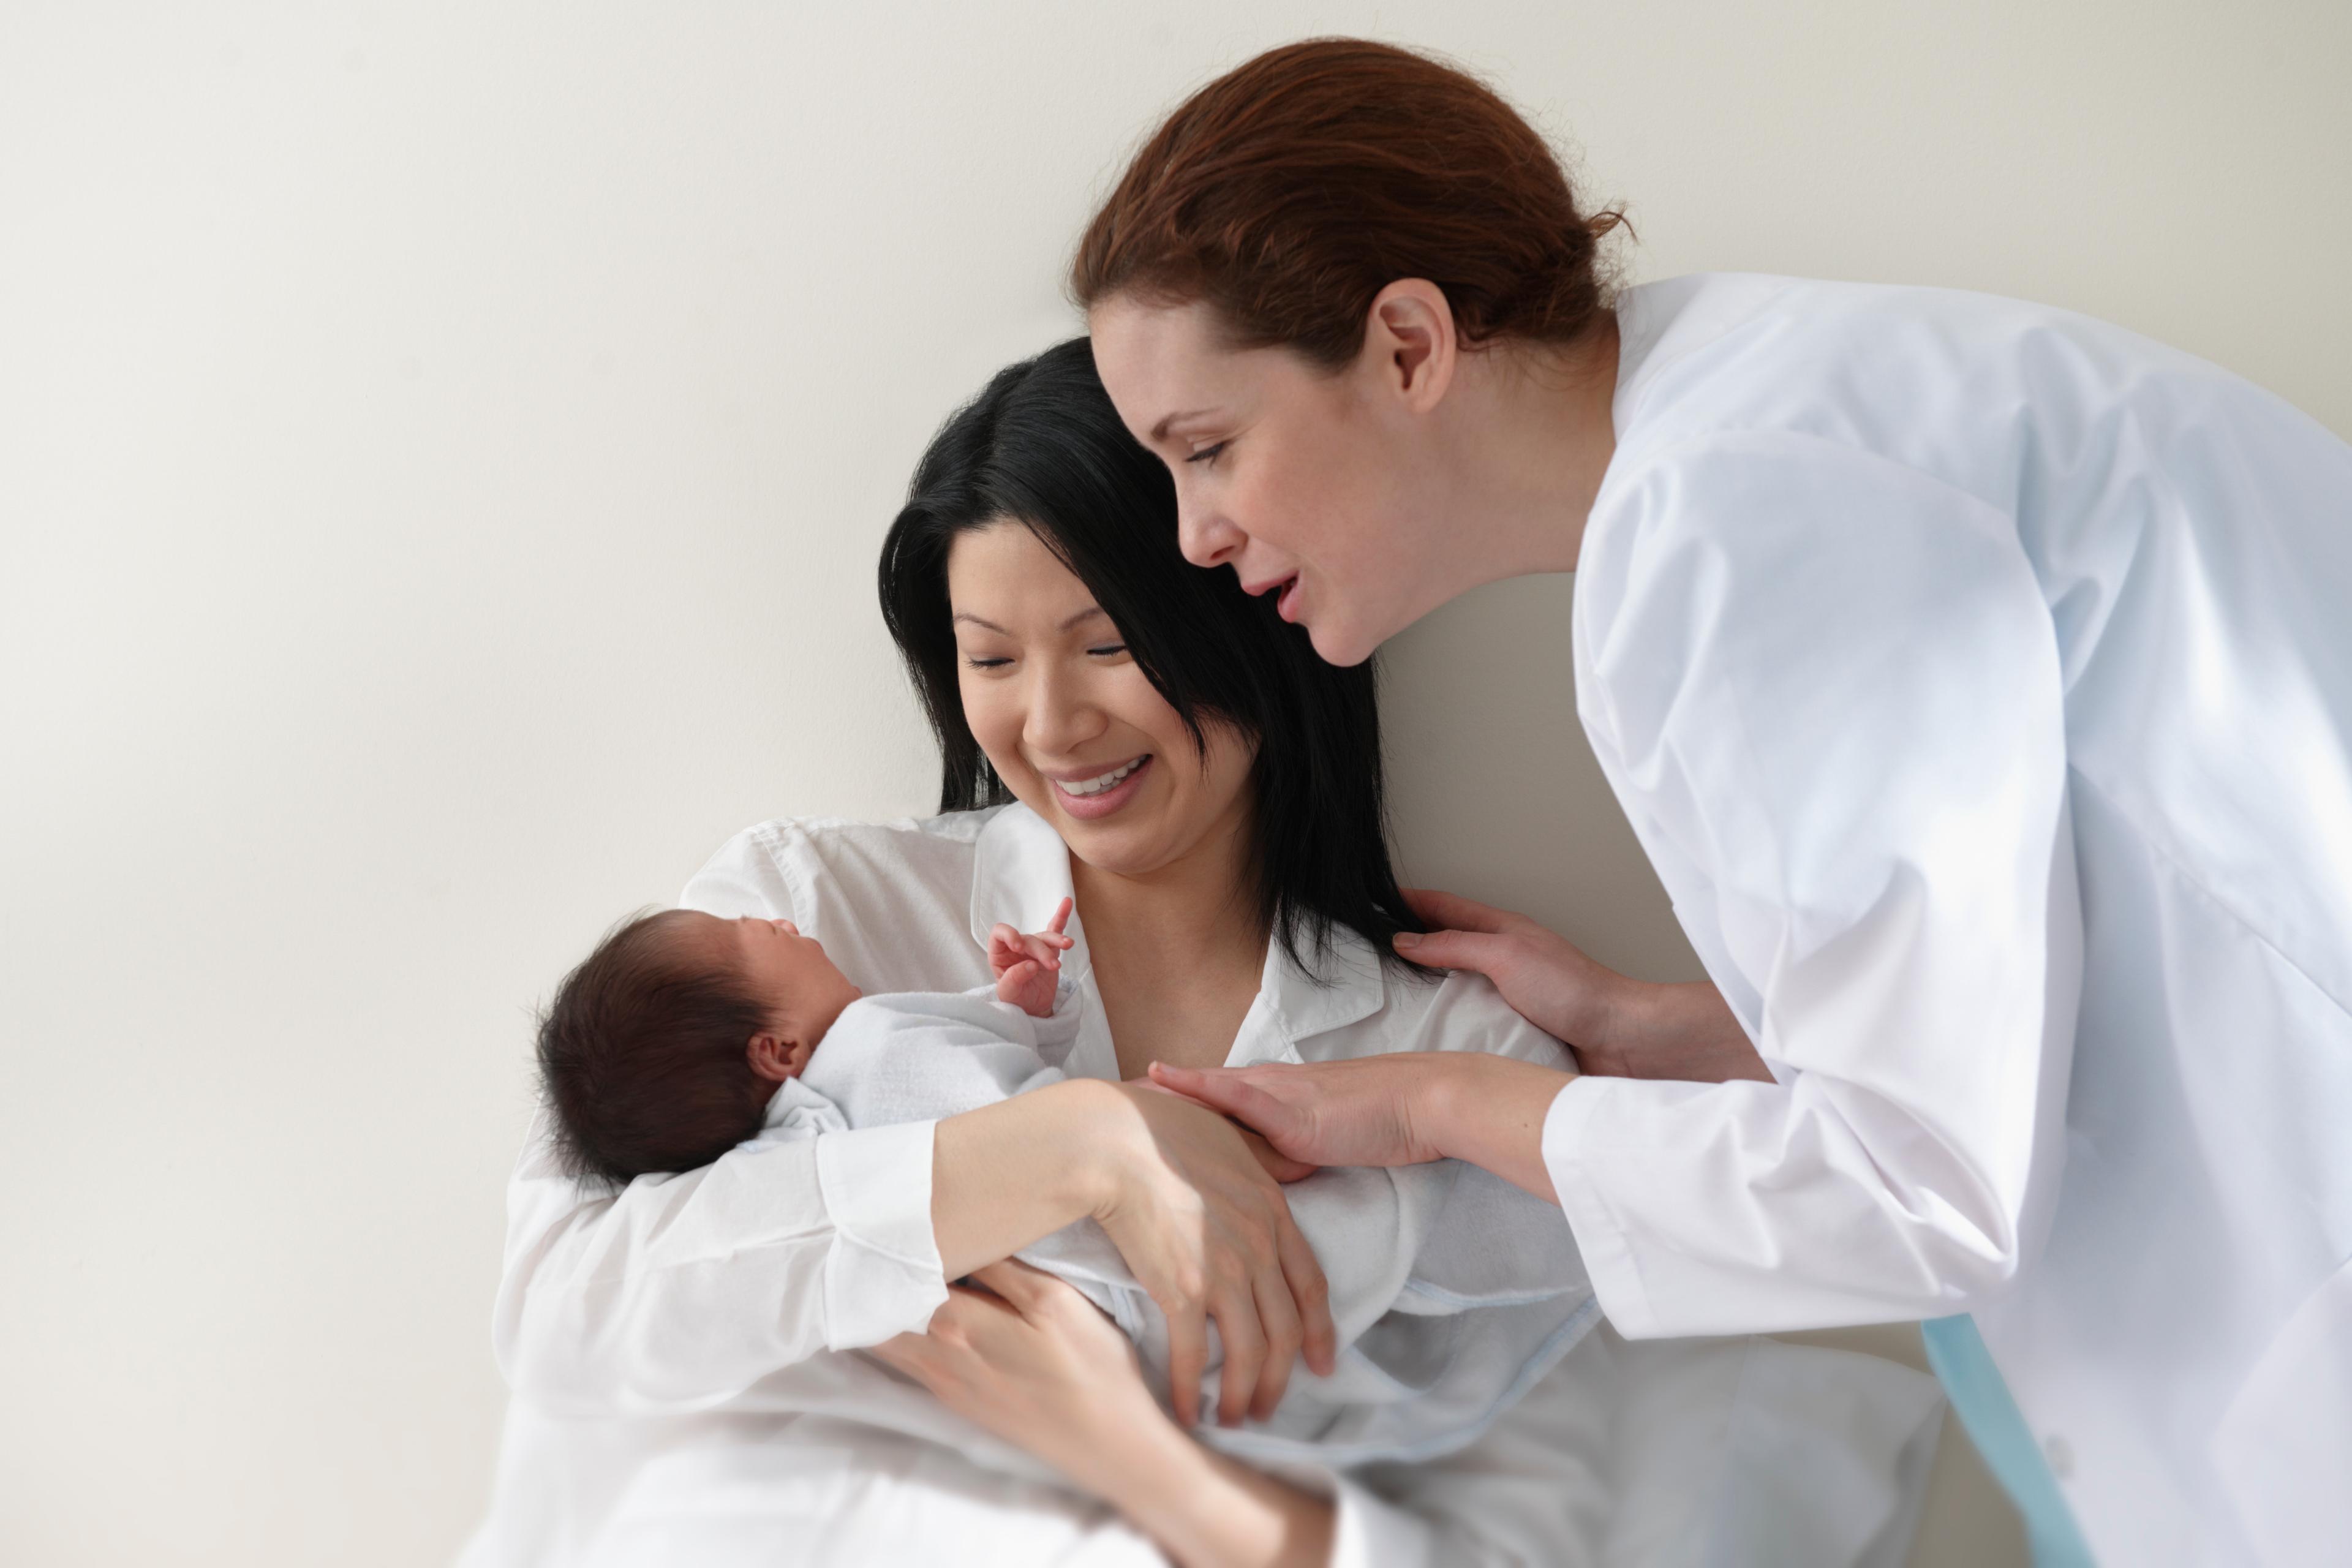 Can family nurse practitioners specialize? a picture of an FNP speaking to a newborn